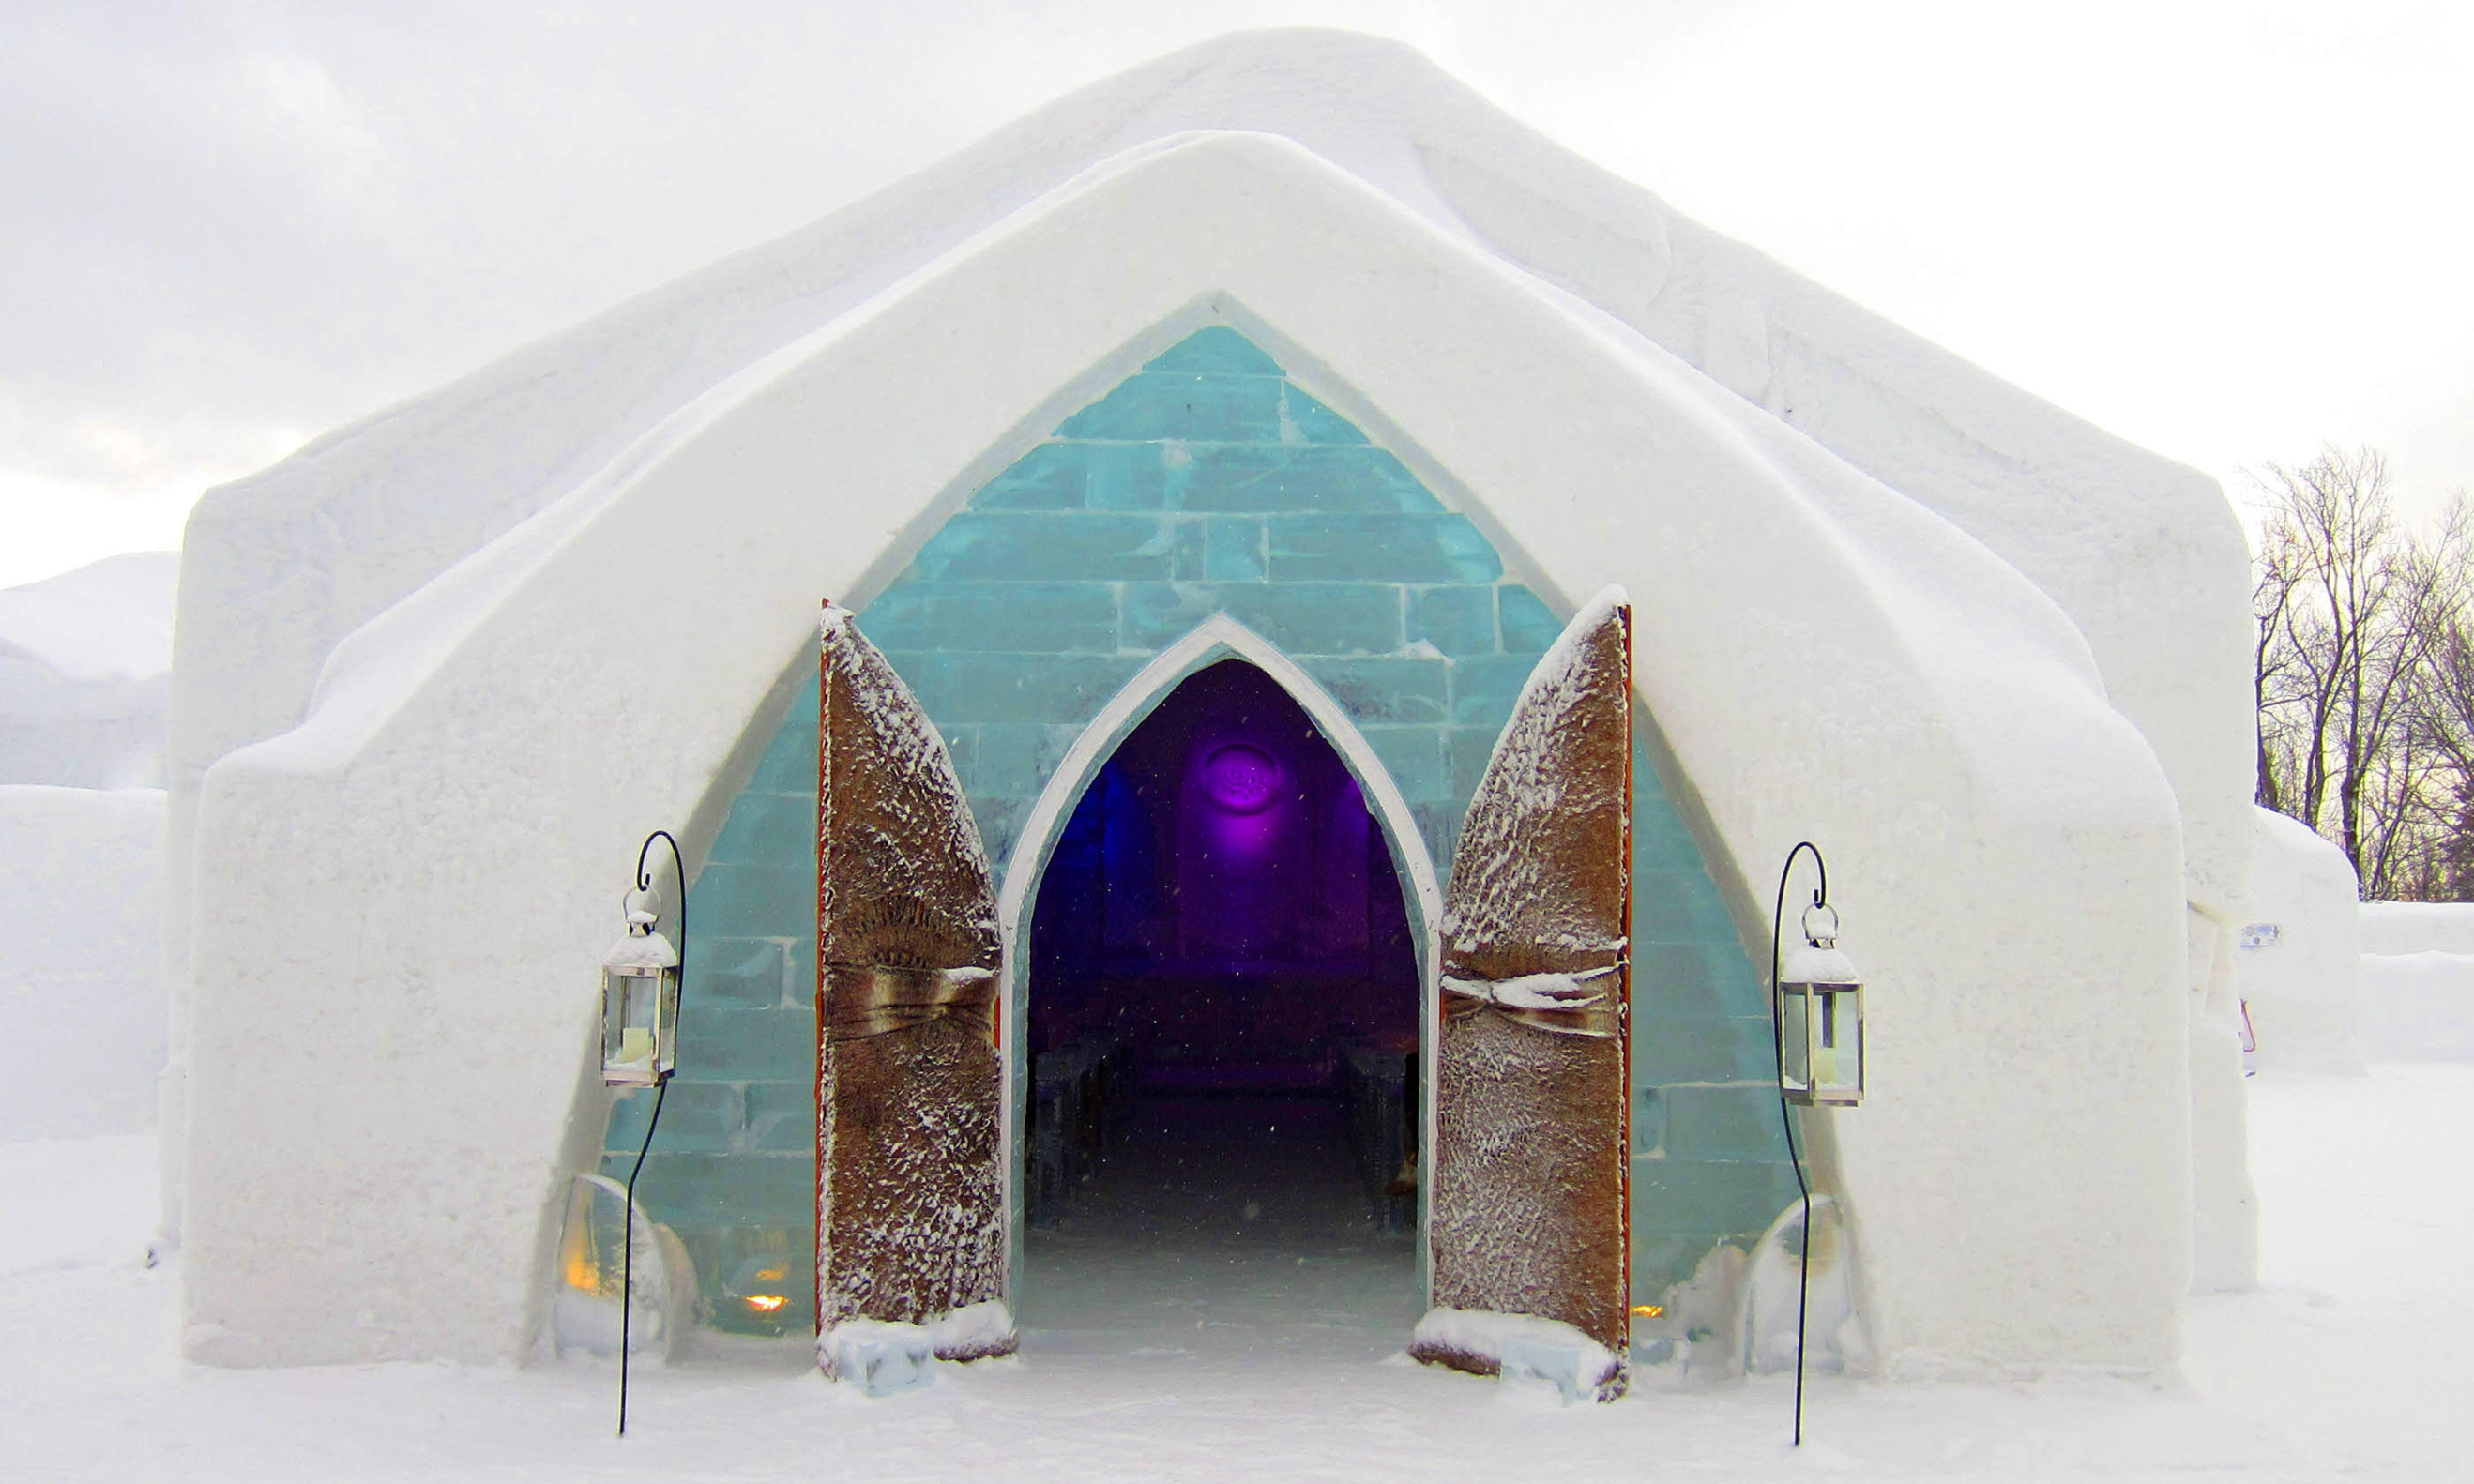 Winter at the Hotel de Glace (Shutterstock)